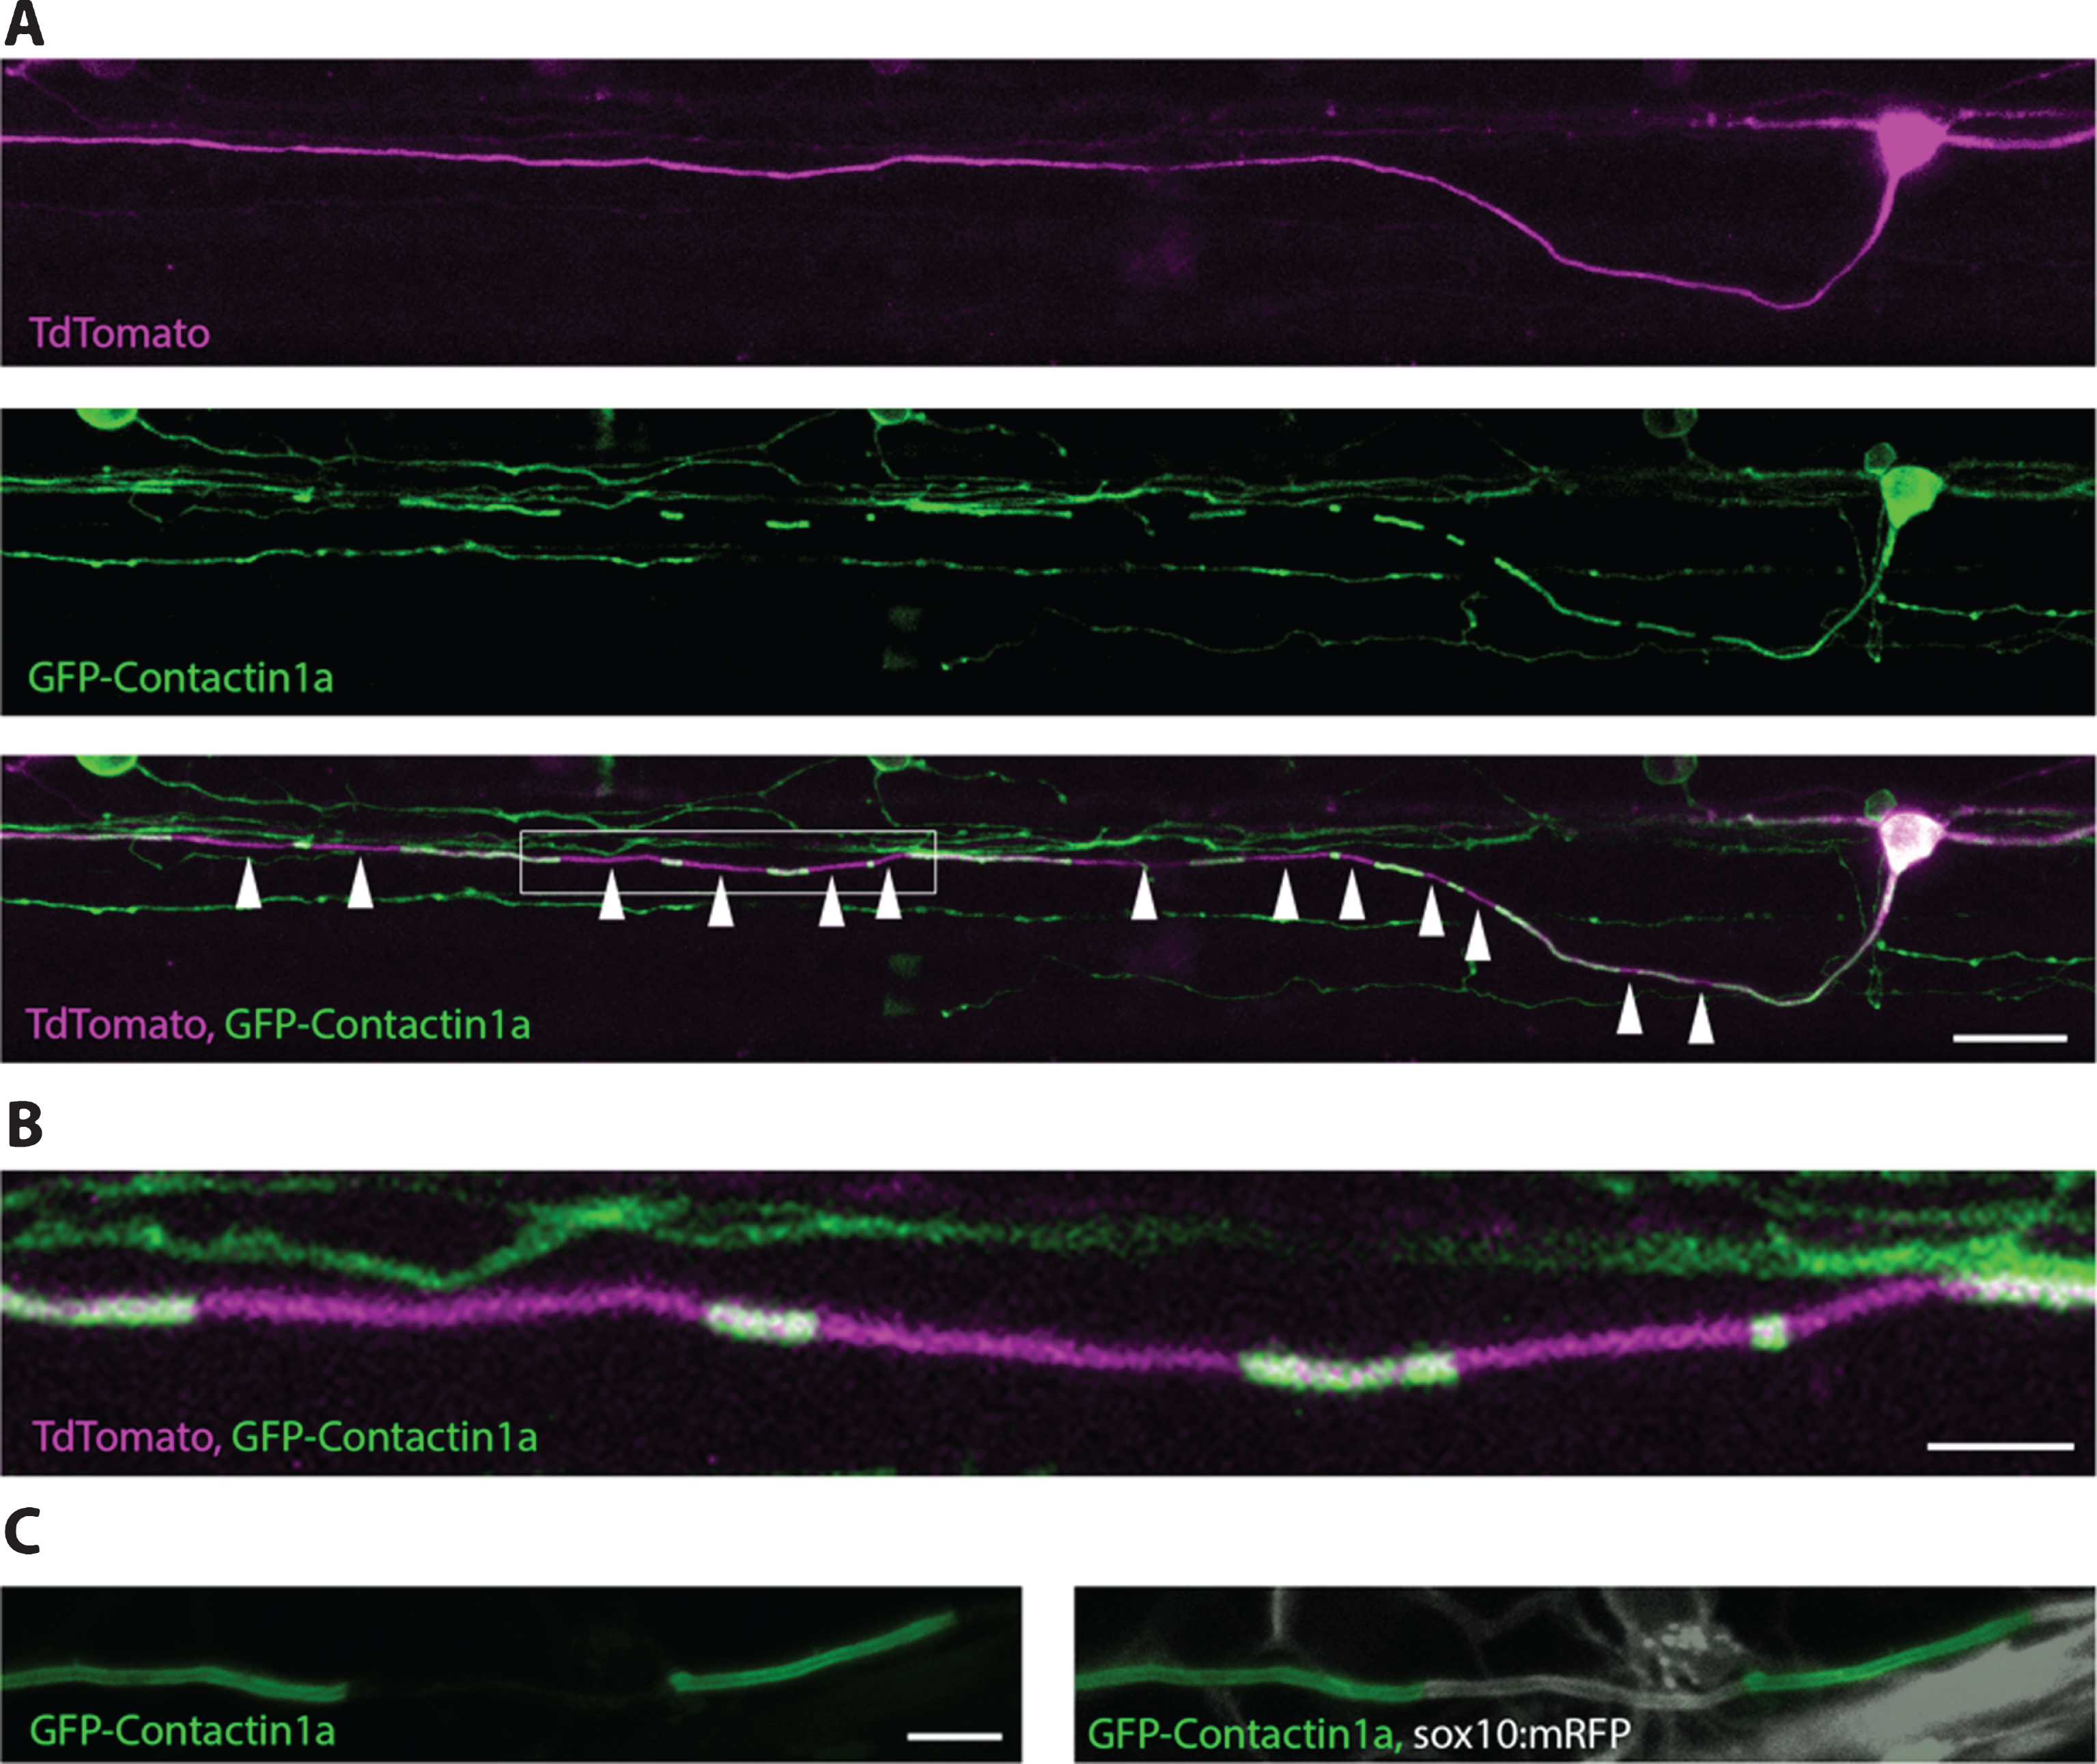 Transgenic tool to visualize myelin along individual axons in vivo. A fluorescent fusion of GFP with the GPI anchored axonal protein contactin1a can be expressed in individual neurons together with a fluorescent protein that labels the entire cell, e.g. Tandem dimer (Td) Tomato (A). Gaps in GFP-Cntn1a localisation along axons (A+B) correspond to the locations of myelin sheaths, as shown in (C) where all myelin is labelled using the sox10:mRFP reporter. Scale bars: A = 20 μm, B+C = 5 μm.